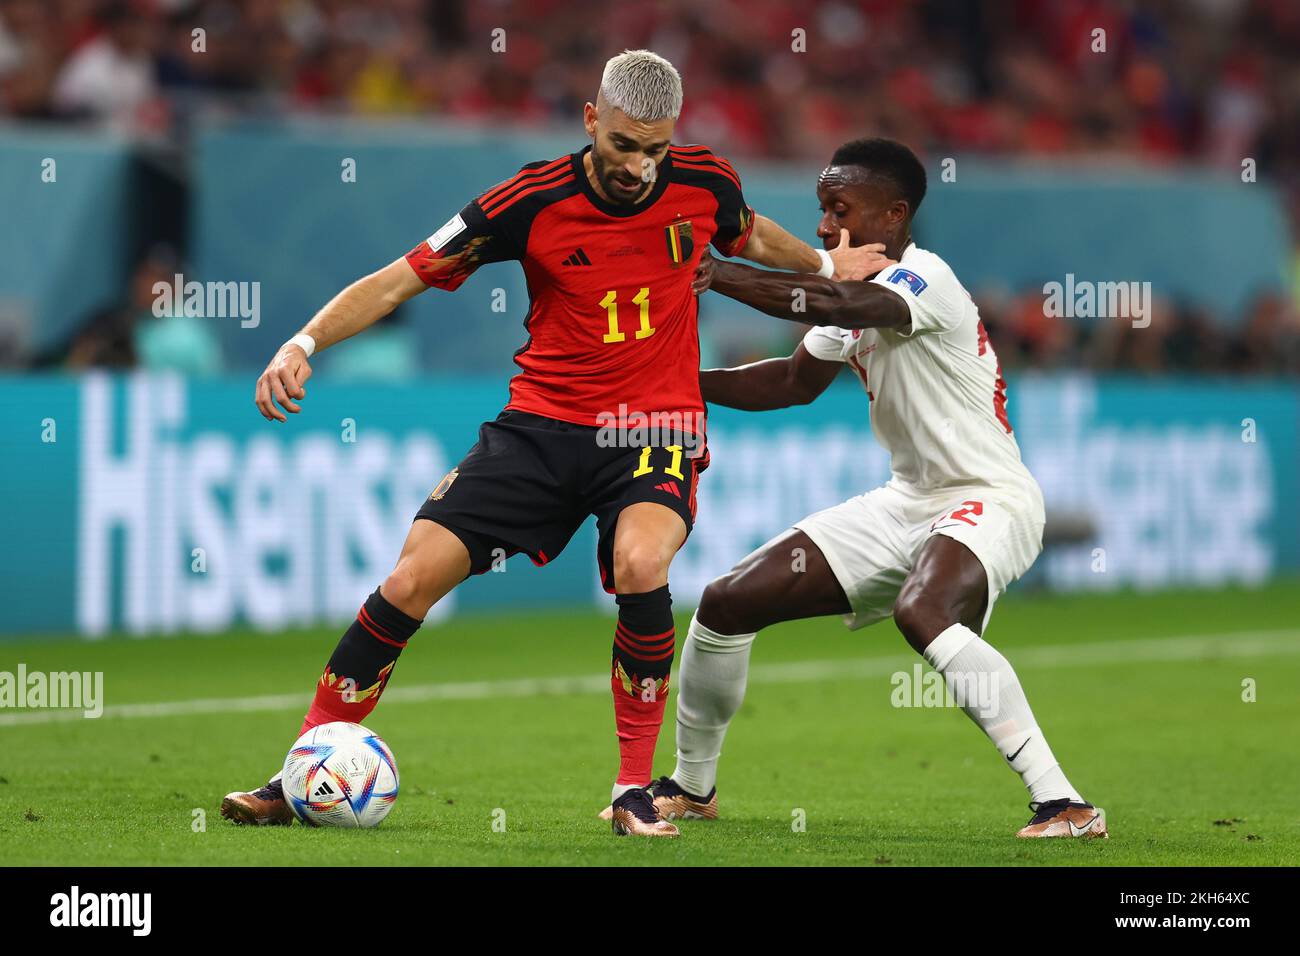 Doha, Qatar. 23rd Nov, 2022. Yannick Carrasco (L) of Belgium in action with Richie Laryea of Canada during the 2022 FIFA World Cup Group F match at the Ahmad Bin Ali Stadium in Doha, Qatar on November 23, 2022. Photo by Chris Brunskill/UPI Credit: UPI/Alamy Live News Stock Photo